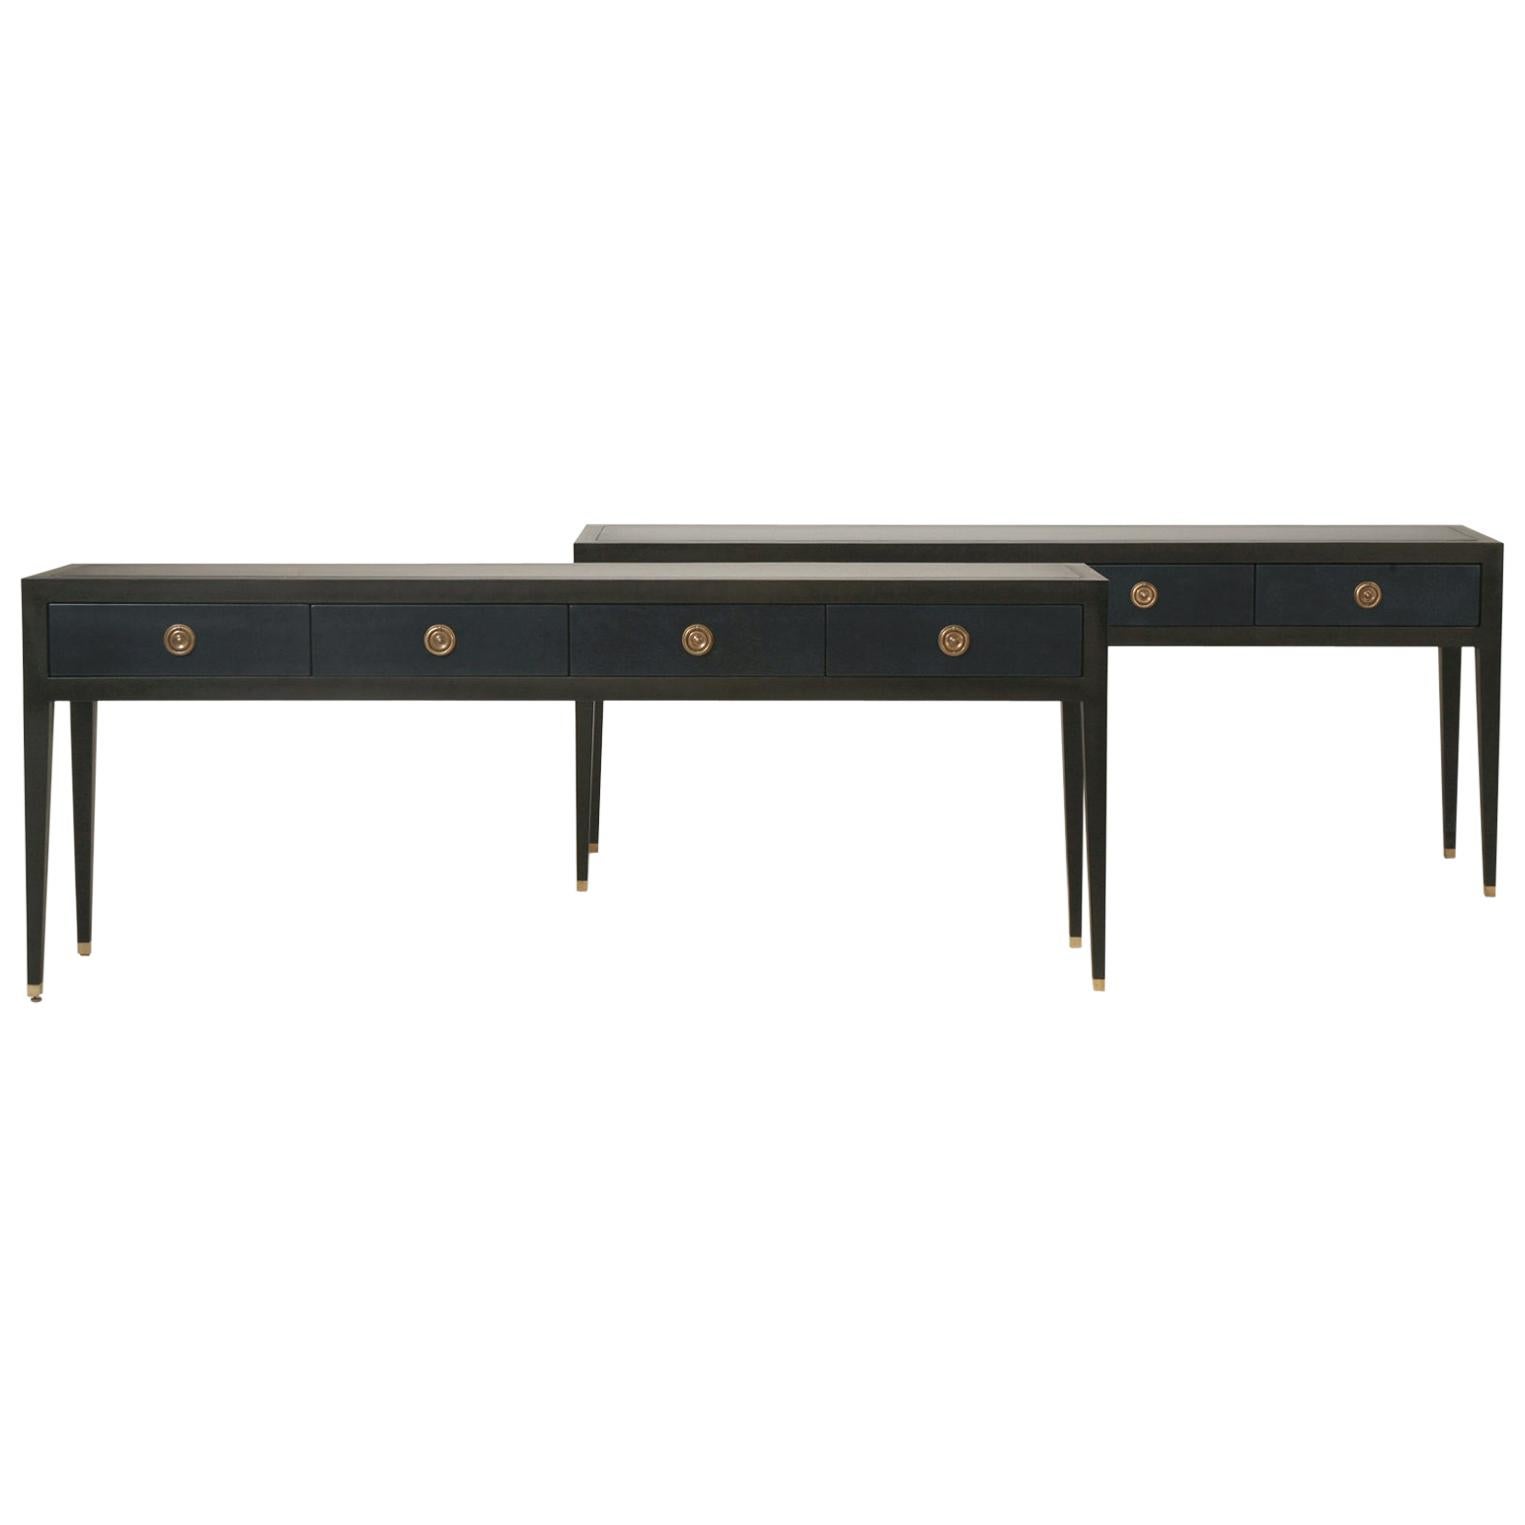 Pair of Console or Sofa Tables from the Old Plank Collection in Leather and Wood